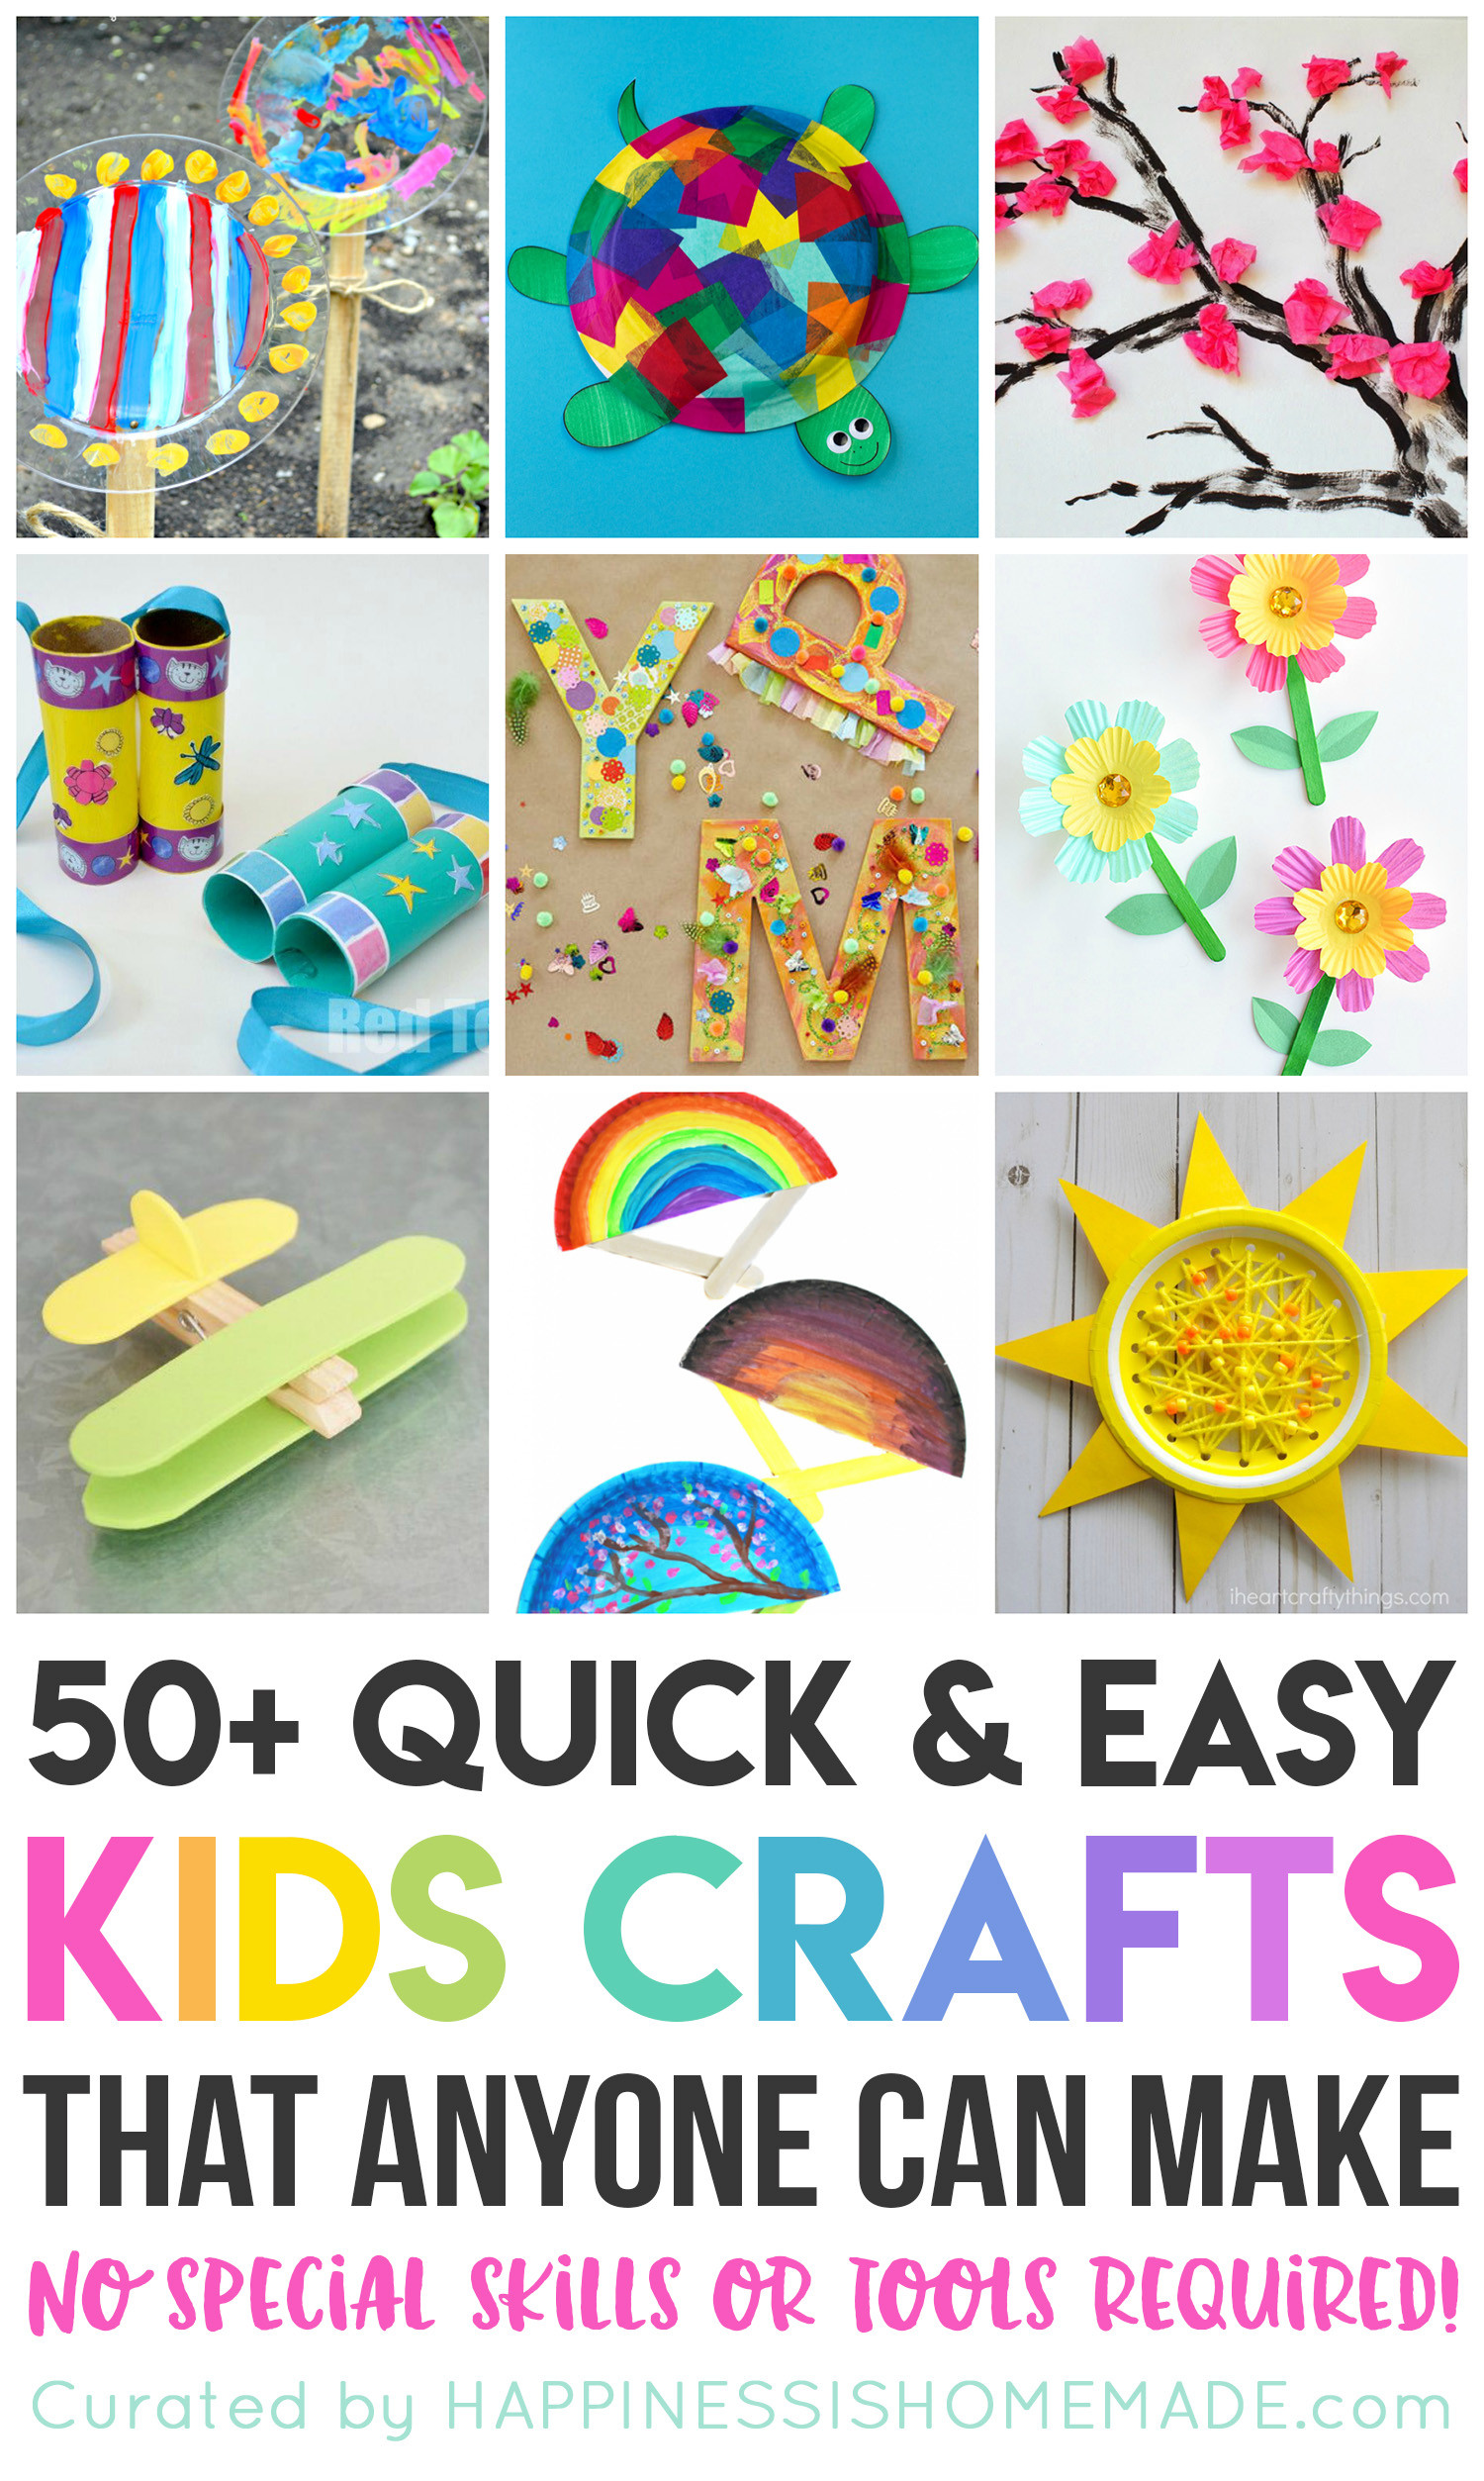 Easy Craft Ideas For Kids
 Quick & Easy Halloween Crafts for Kids Happiness is Homemade